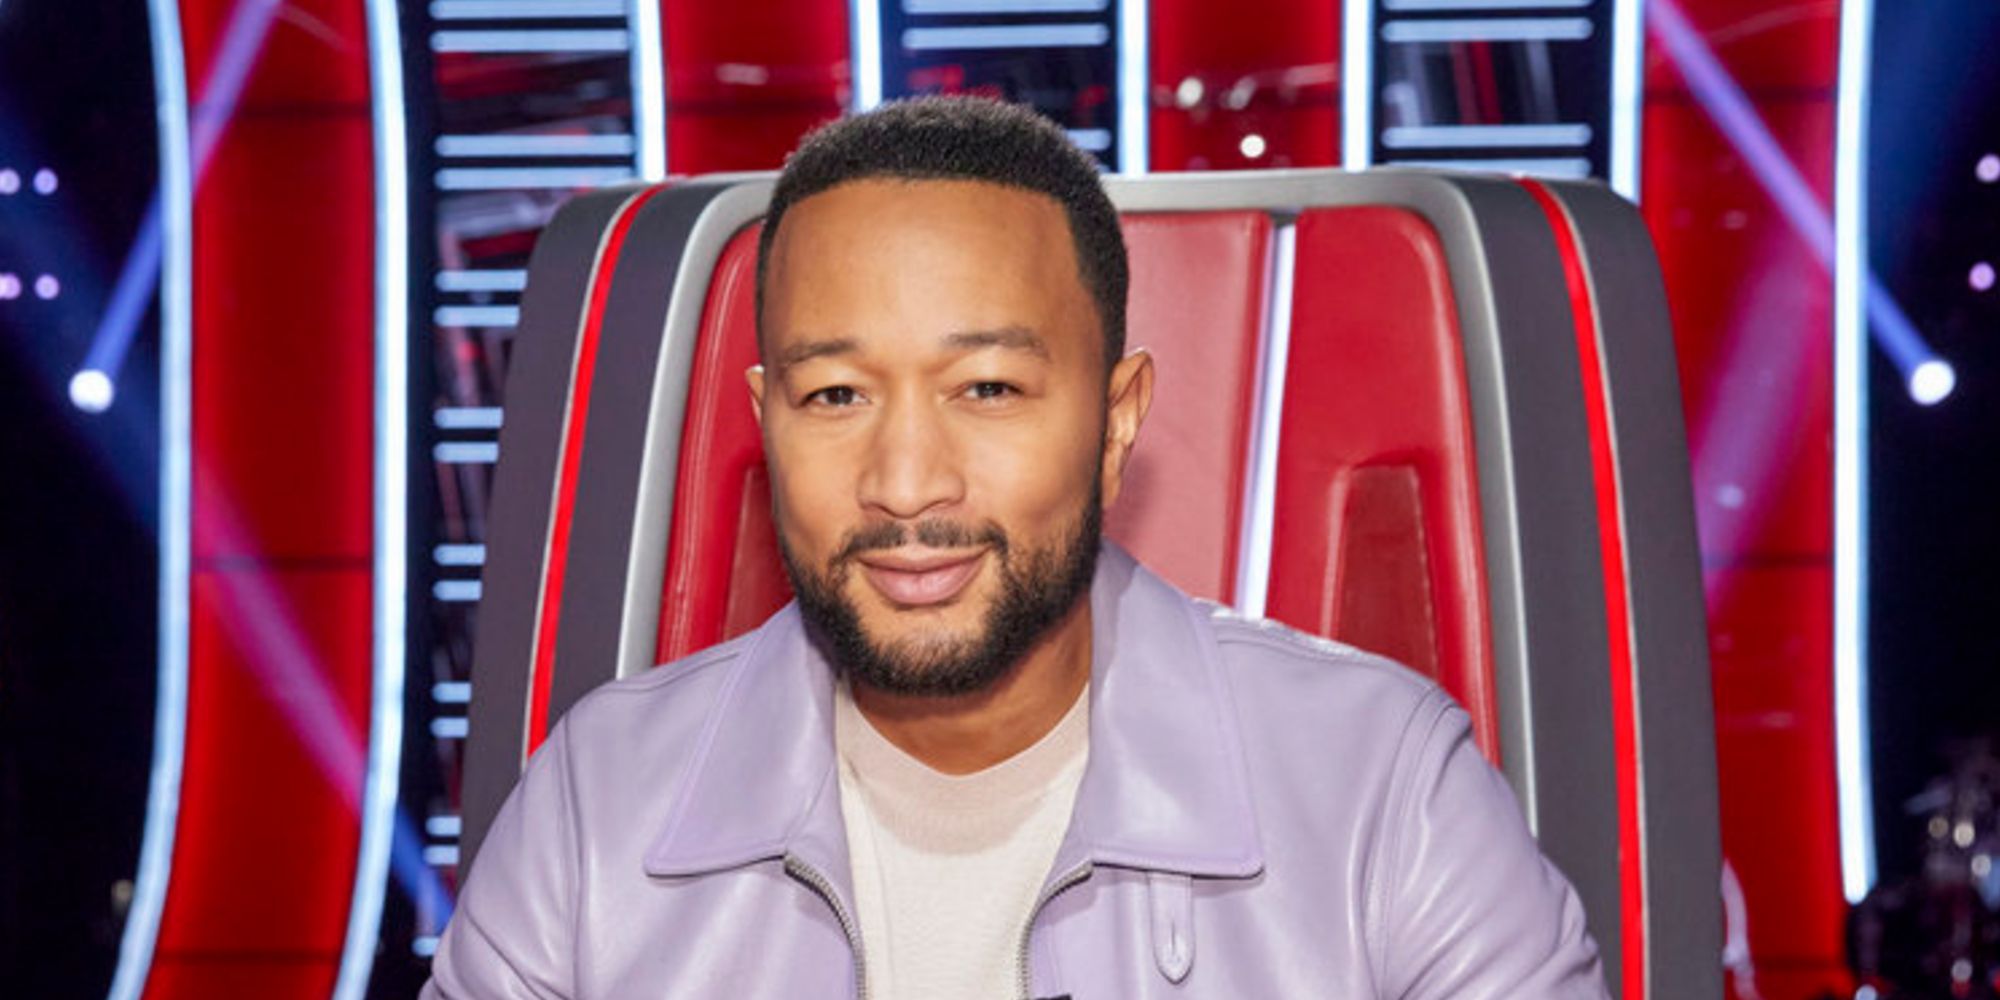 John Legend in his chair on The Voice.